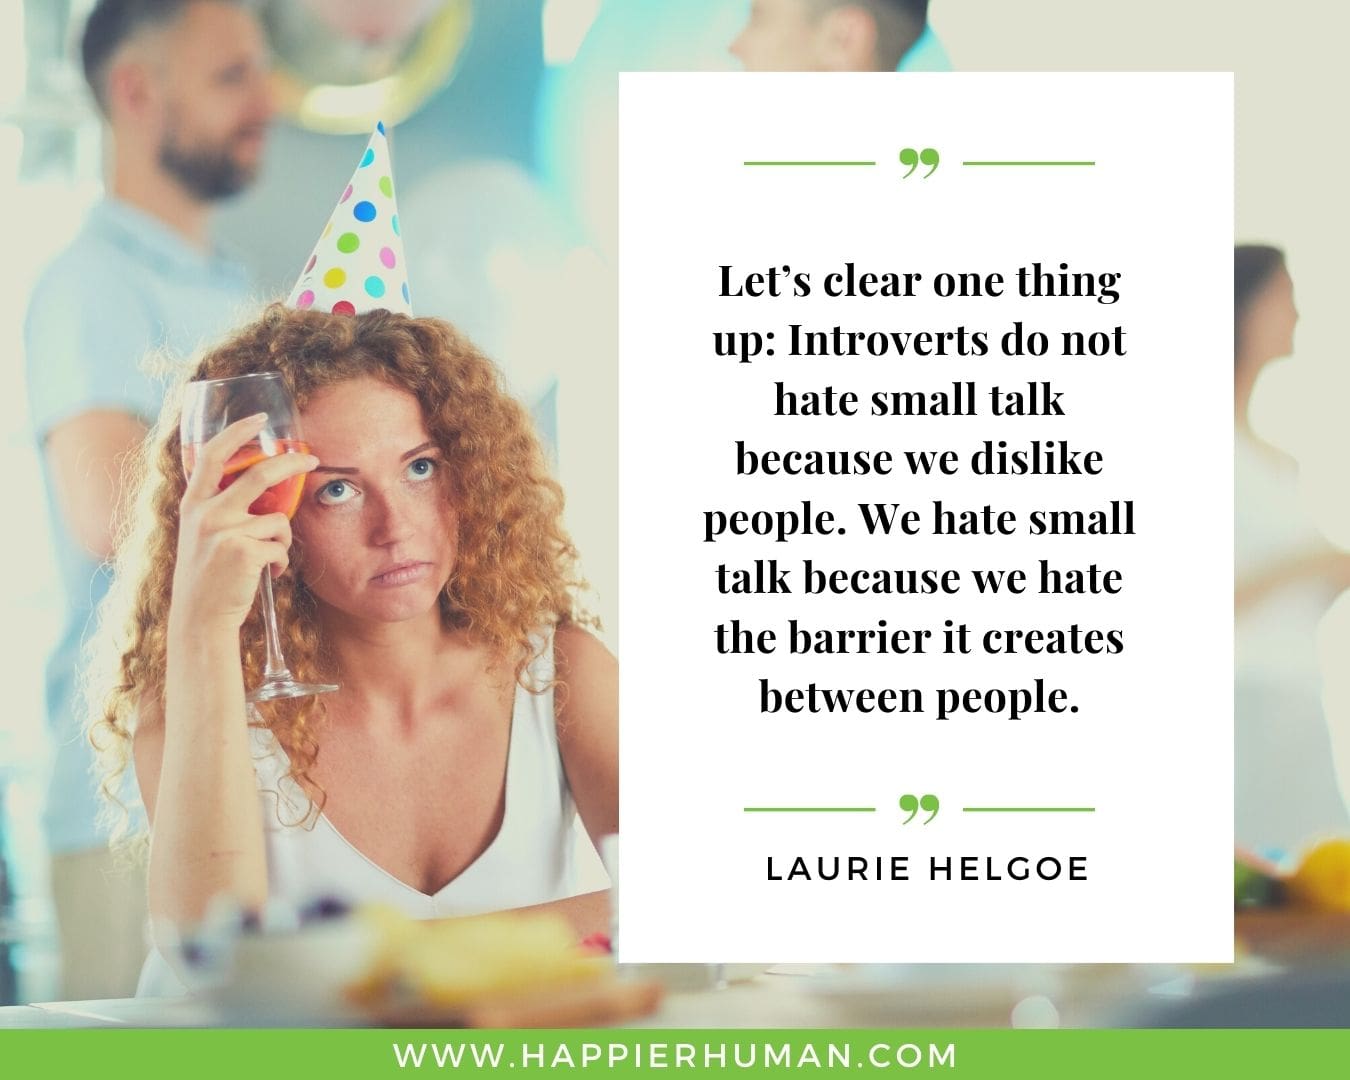 Introvert Quotes - “Let’s clear one thing up: Introverts do not hate small talk because we dislike people. We hate small talk because we hate the barrier it creates between people.” – Laurie Helgoe